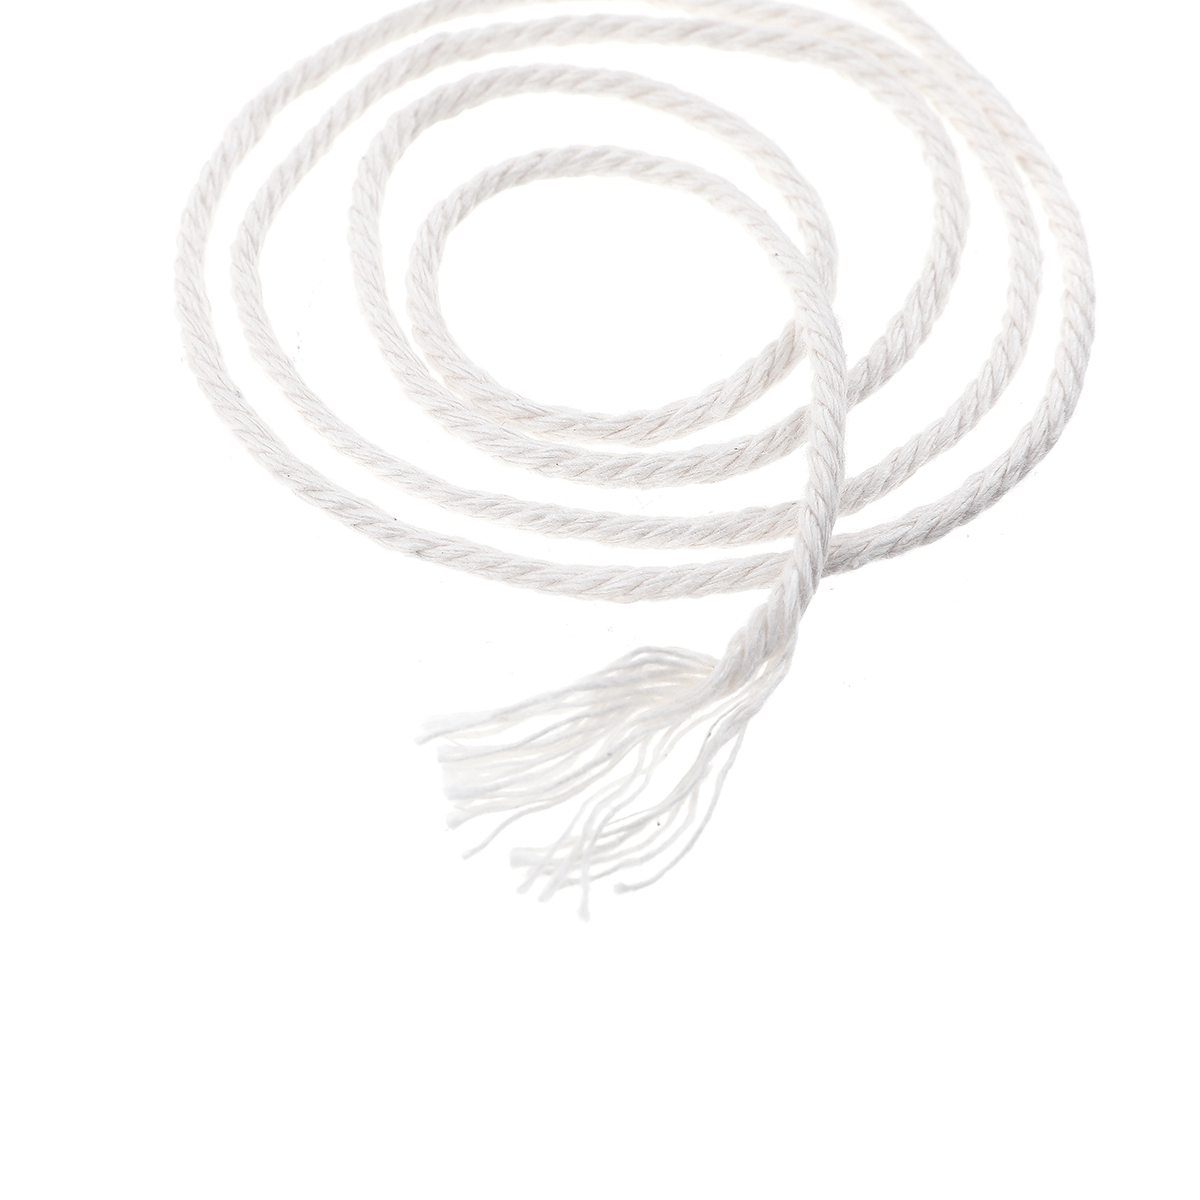 Find Jeteven Natural Macrame Cord 3mm Cotton Cord with 8pcs Wood Ring and 2 Wooden Stick for DIY Craft Braided Wire for Sale on Gipsybee.com with cryptocurrencies